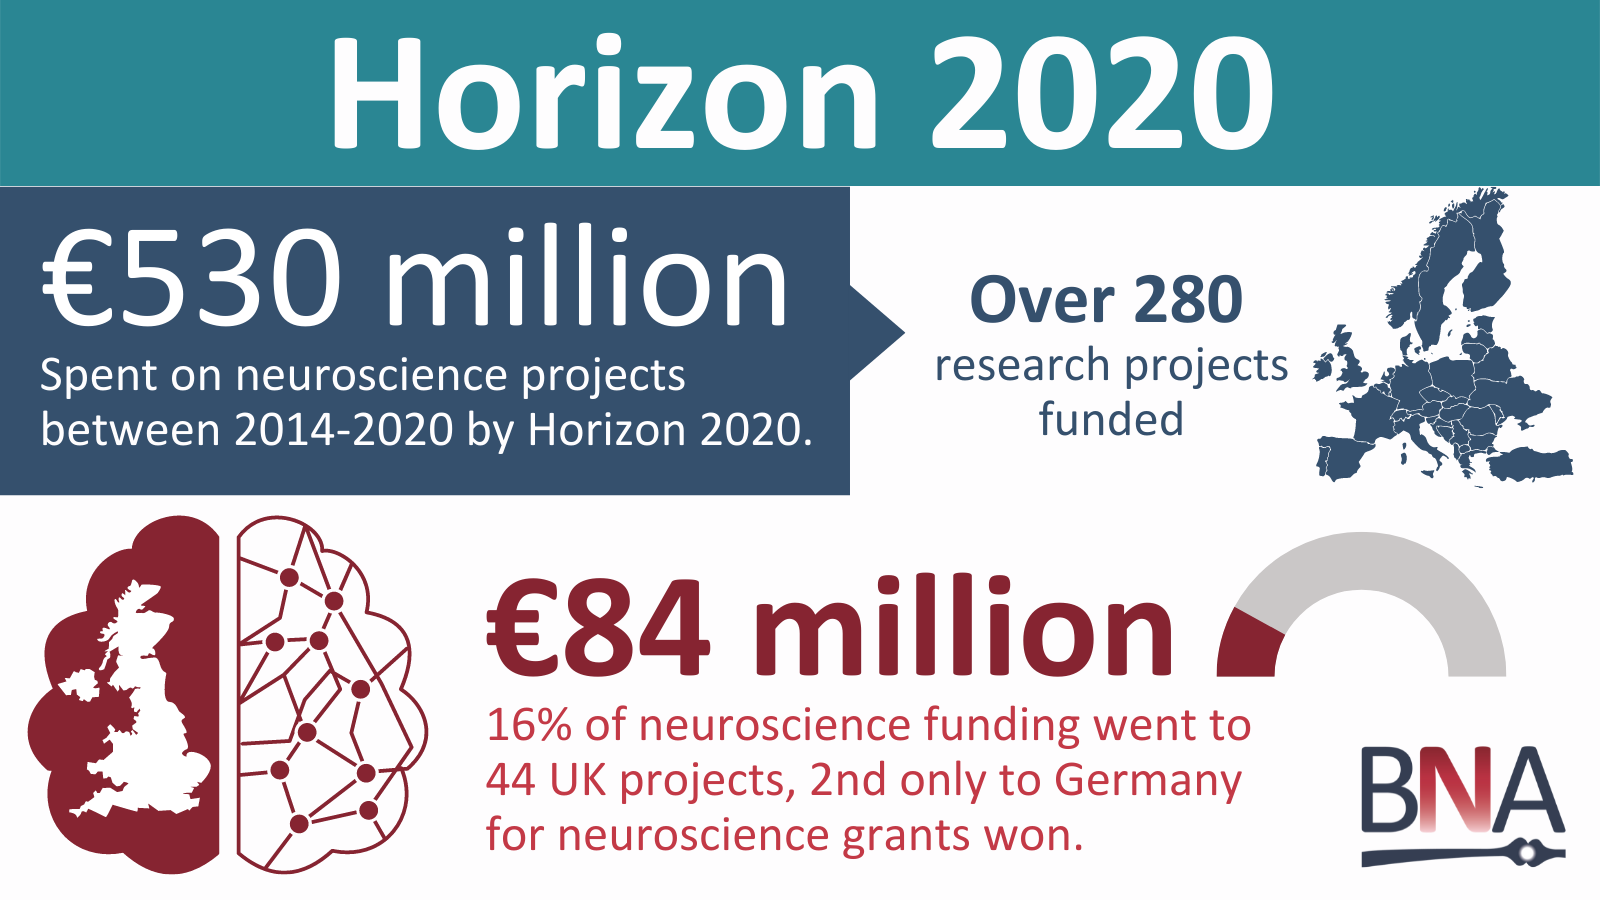 Horizon 2020 saw €530 million spent on over 280 neuroscience projects in the UK between 2014-2020, the 2nd largest total of participant countries